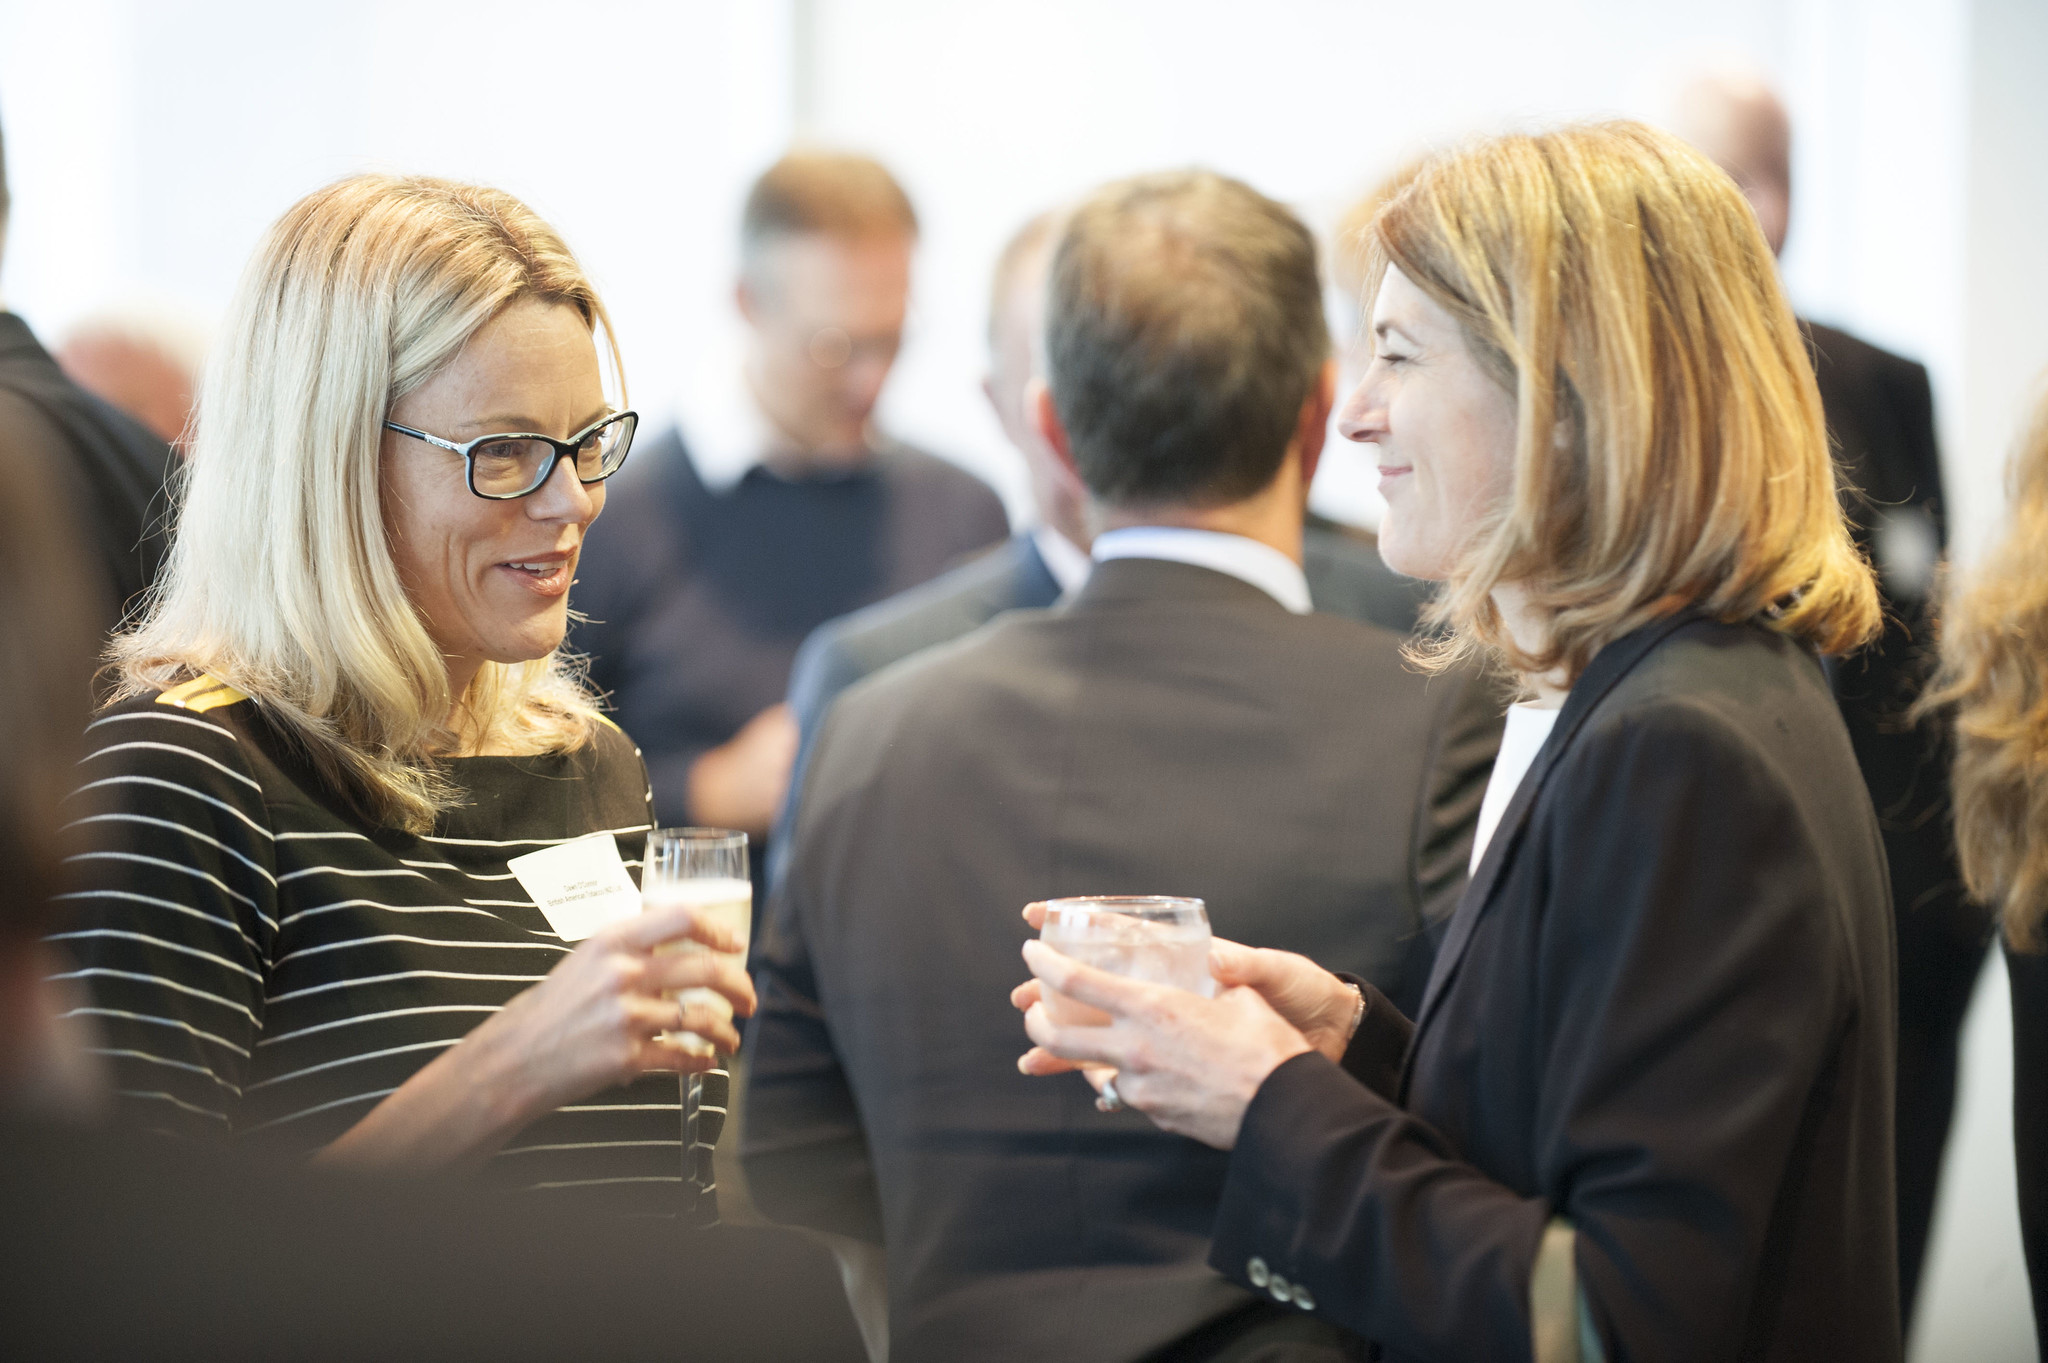 Two women in business attire talk to each other at a networking event.